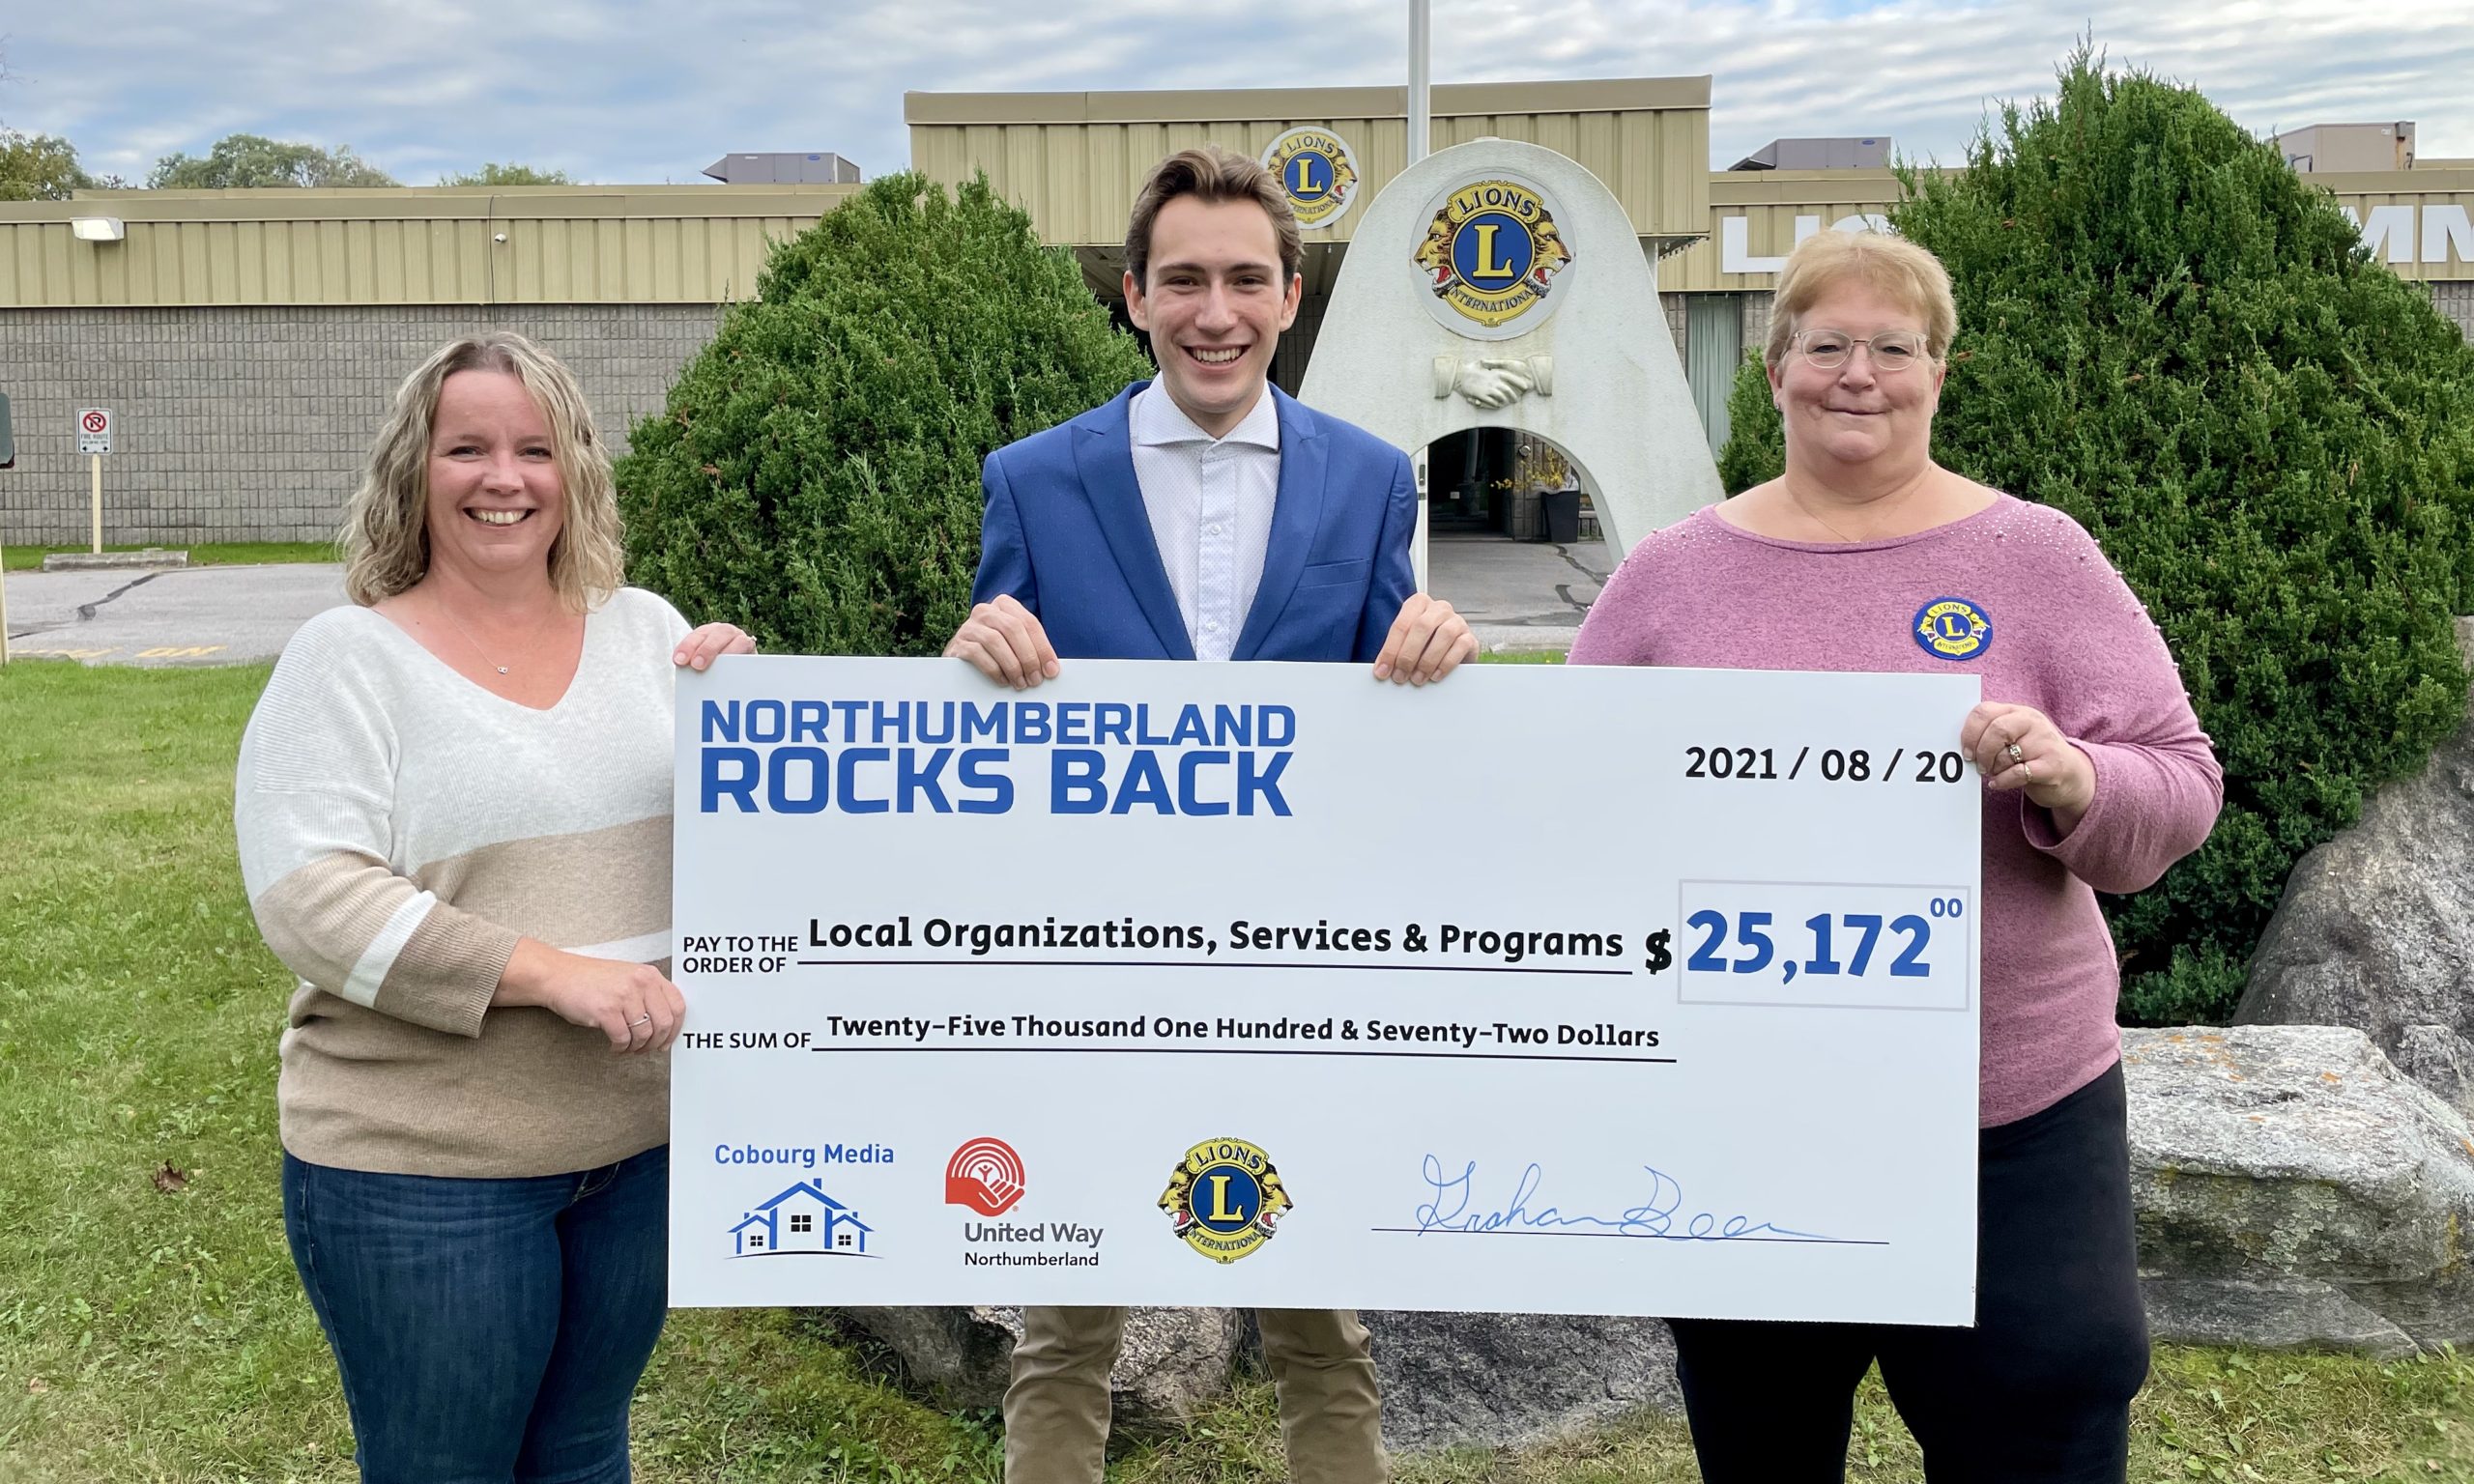 Northumberland Rocks Back Raises Over $25,000 for Local Organizations, Services & Programs